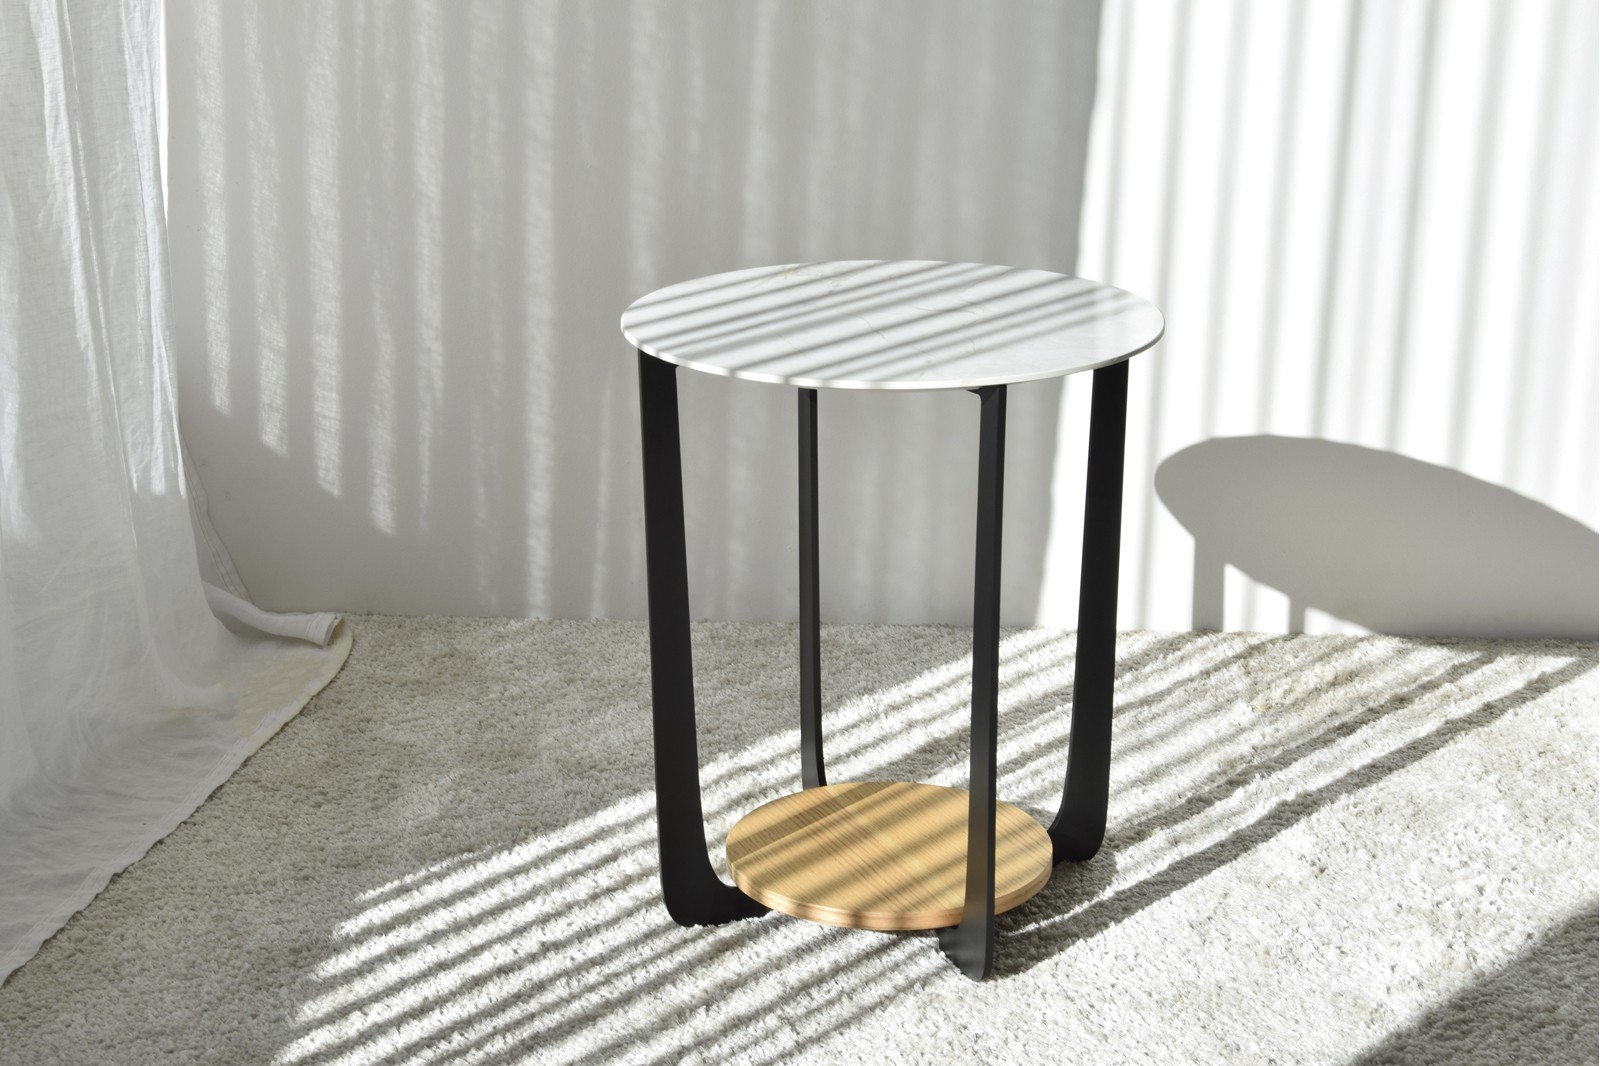 SIDE TABLE N.17. WHITE AND NATURAL OAK